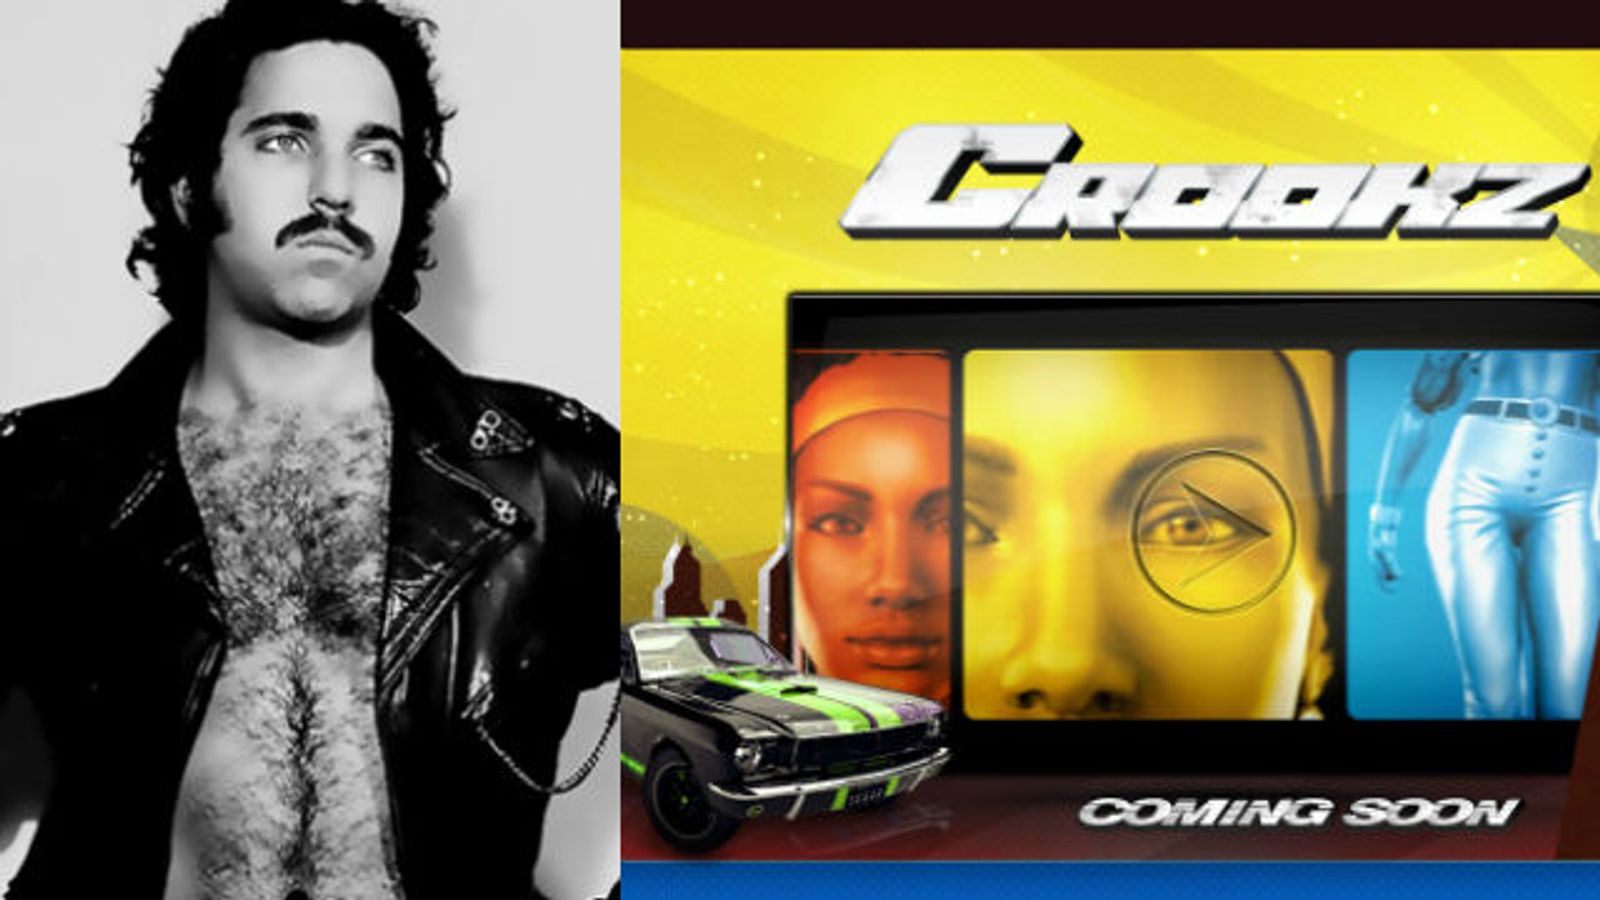 Ron Jeremy in Promo Trailer for Upcoming Video Game 'Crookz'